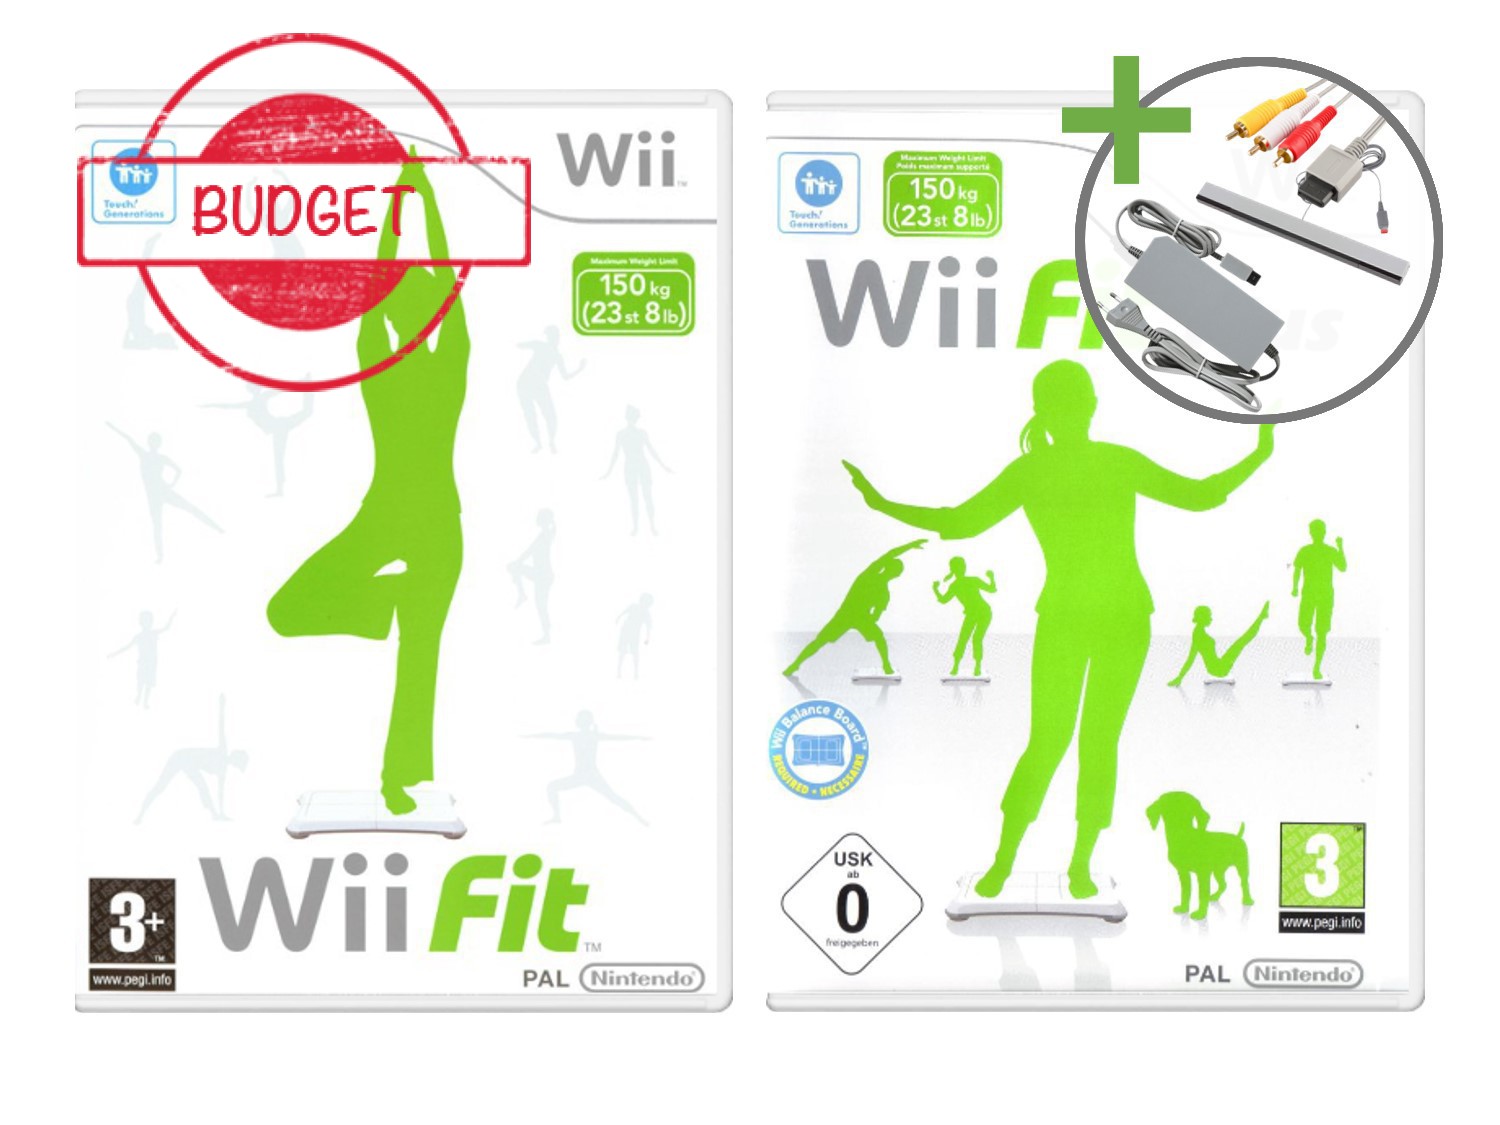 Nintendo Wii Starter Pack - Wii Fit Plus Edition - Budget - Wii Hardware - 5